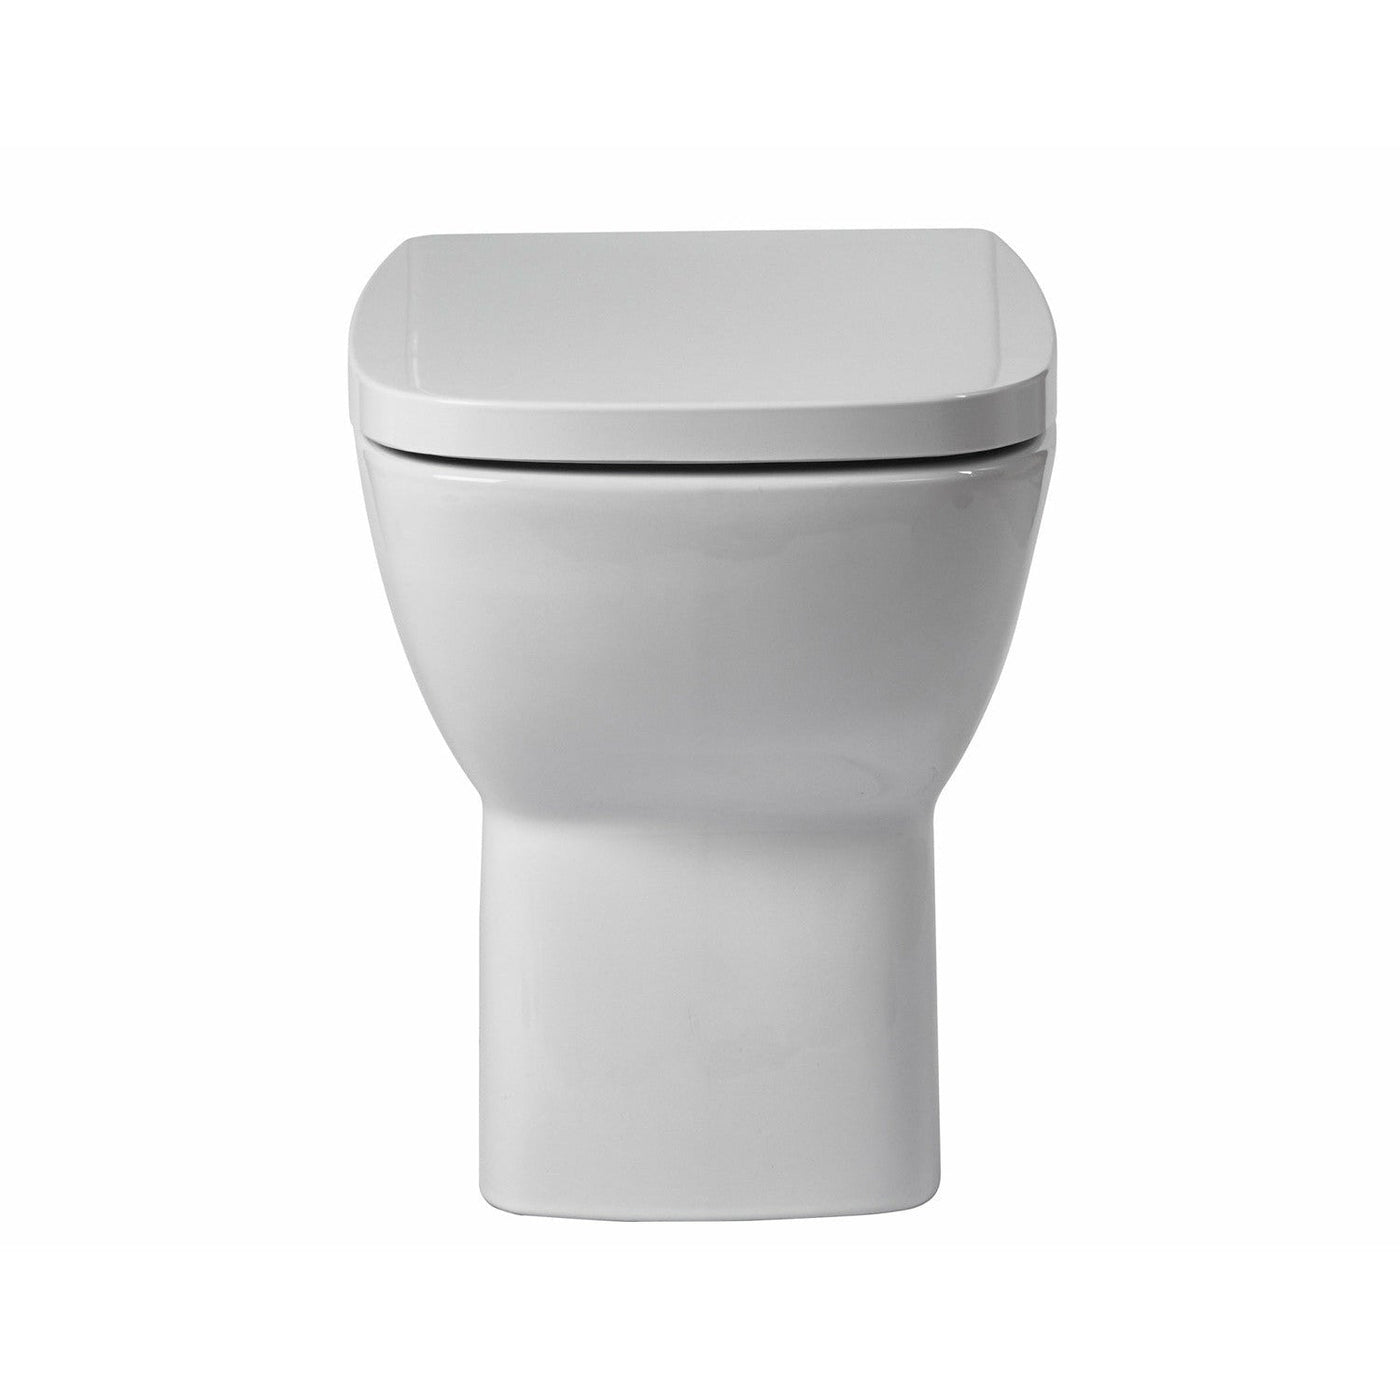 Frontline Piccolo Back-To-Wall Toilet with Soft-Close Seat - Letta London - 